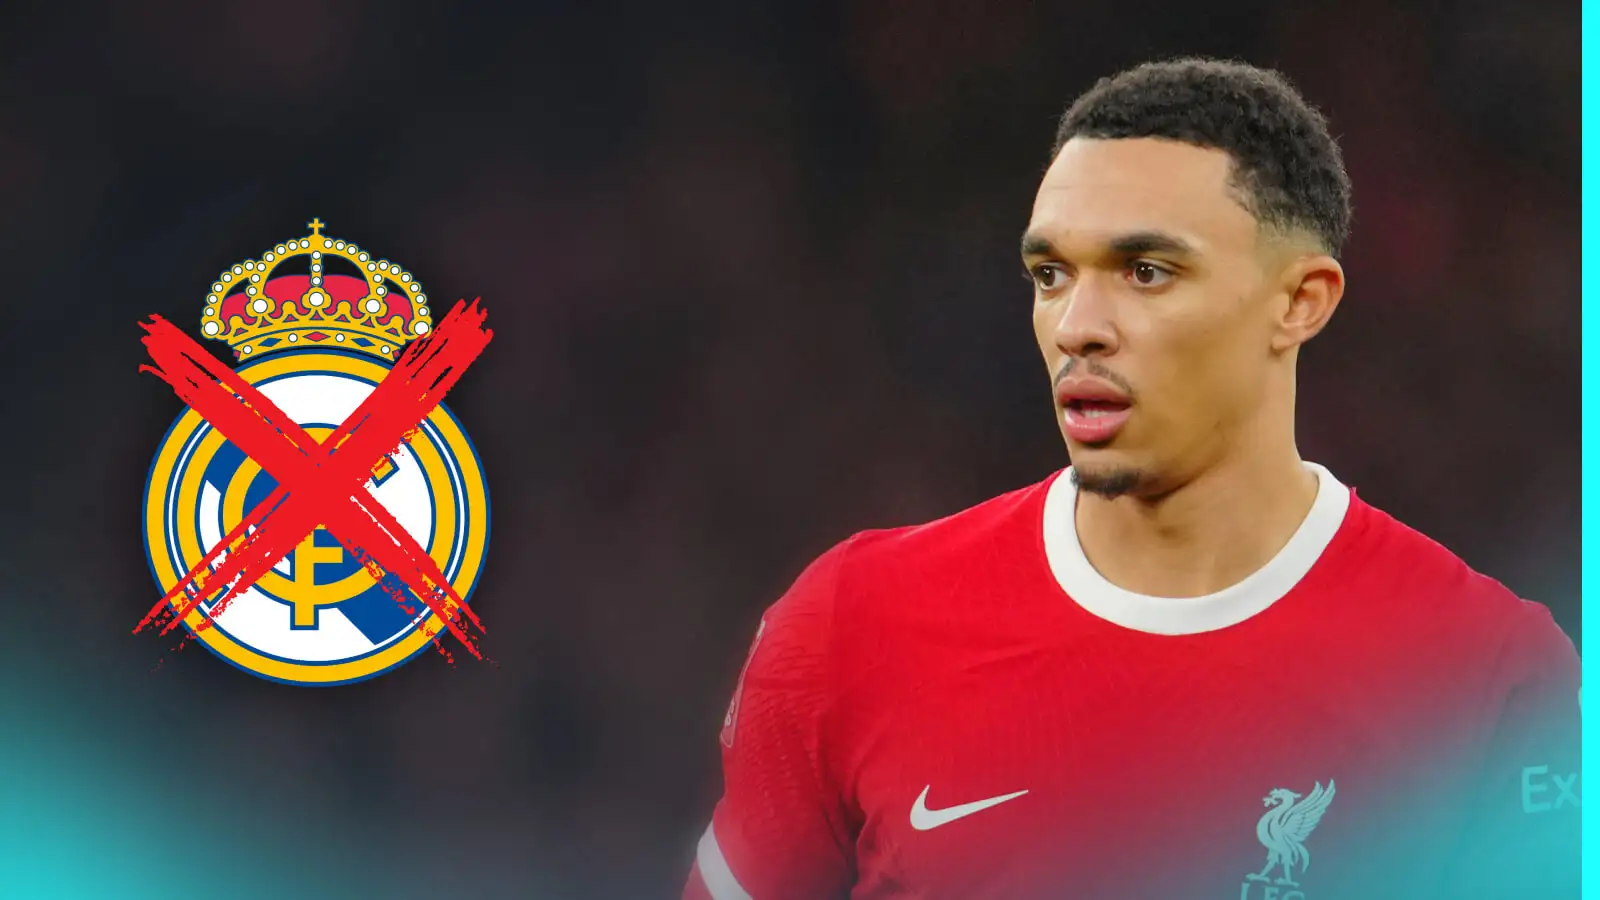 Real Madrid ‘breaks off negotiations’ with Liverpool as Ancelotti ‘doesn’t want’ Alexander-Arnold